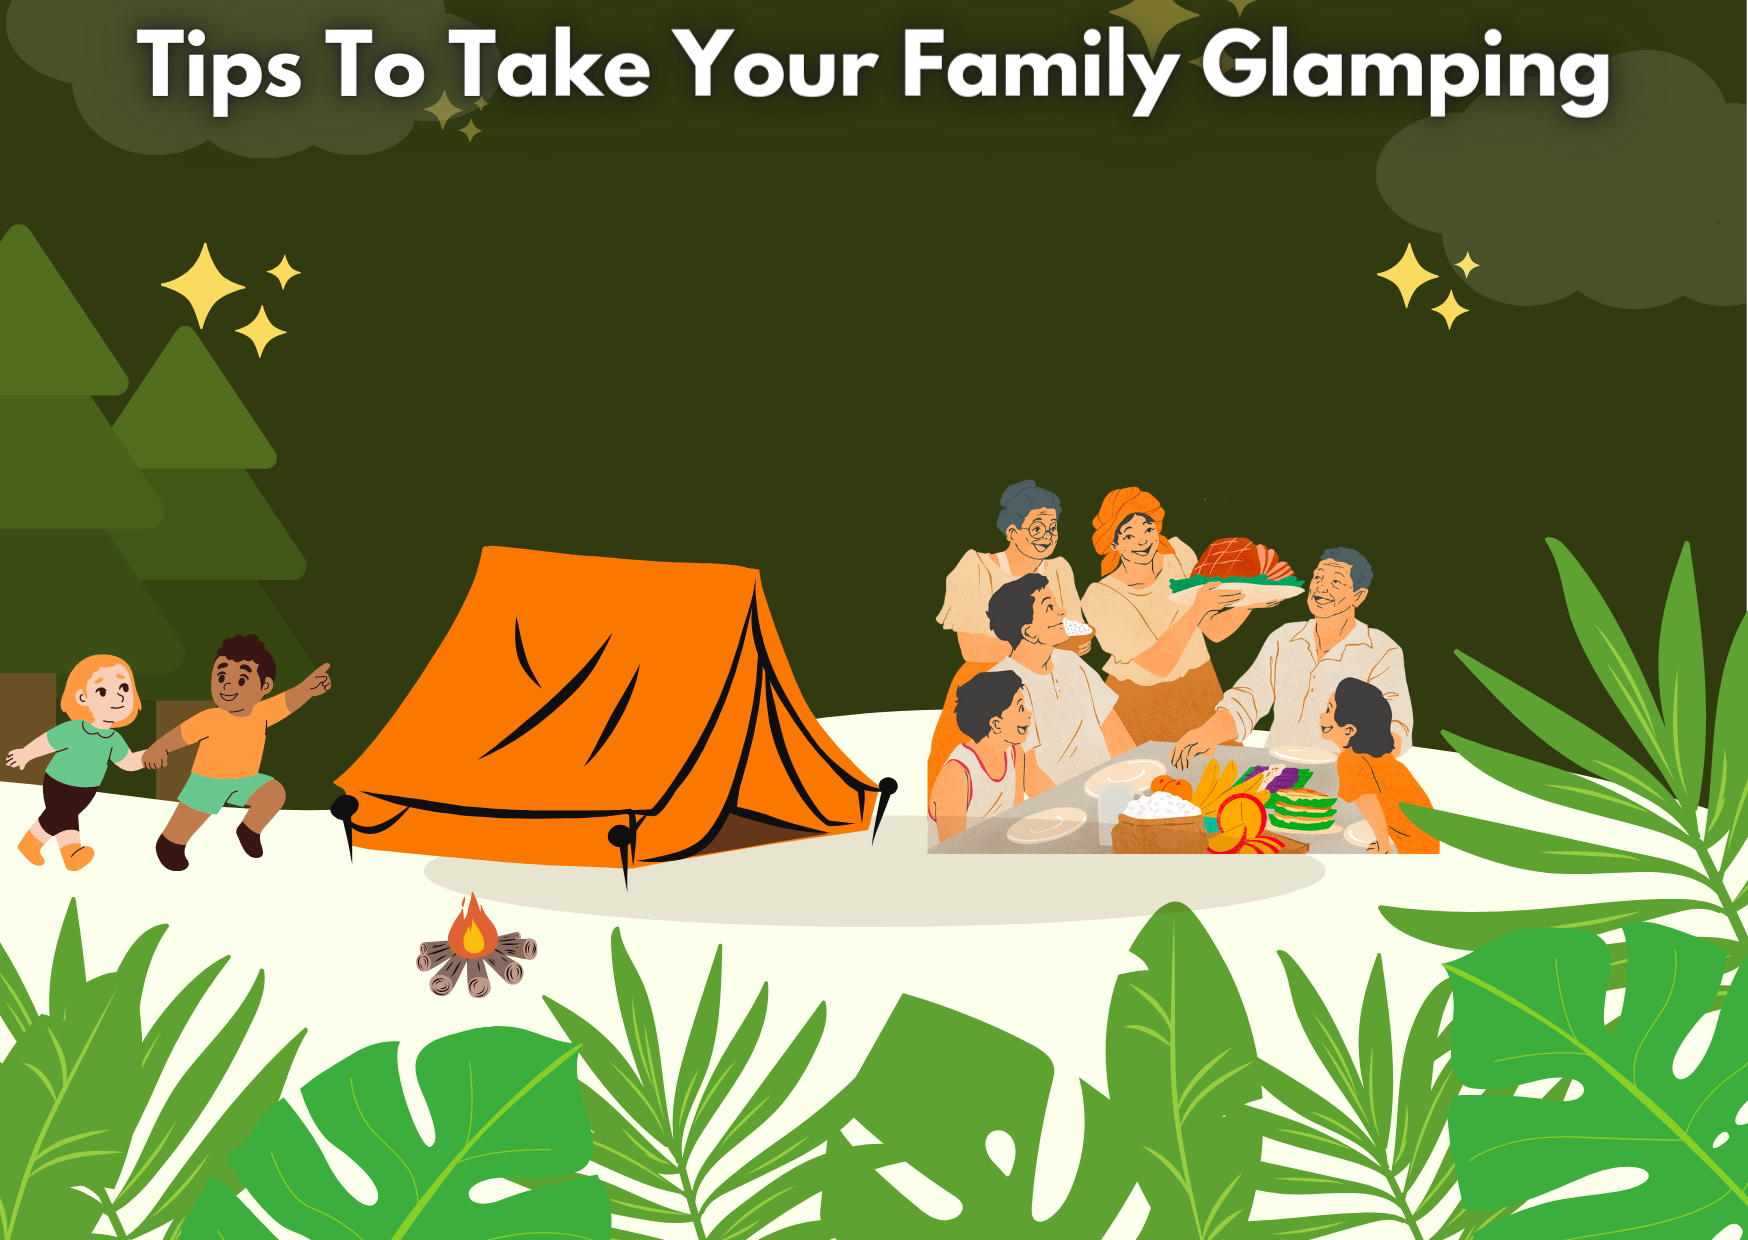 Tips To Take Your Family Glamping